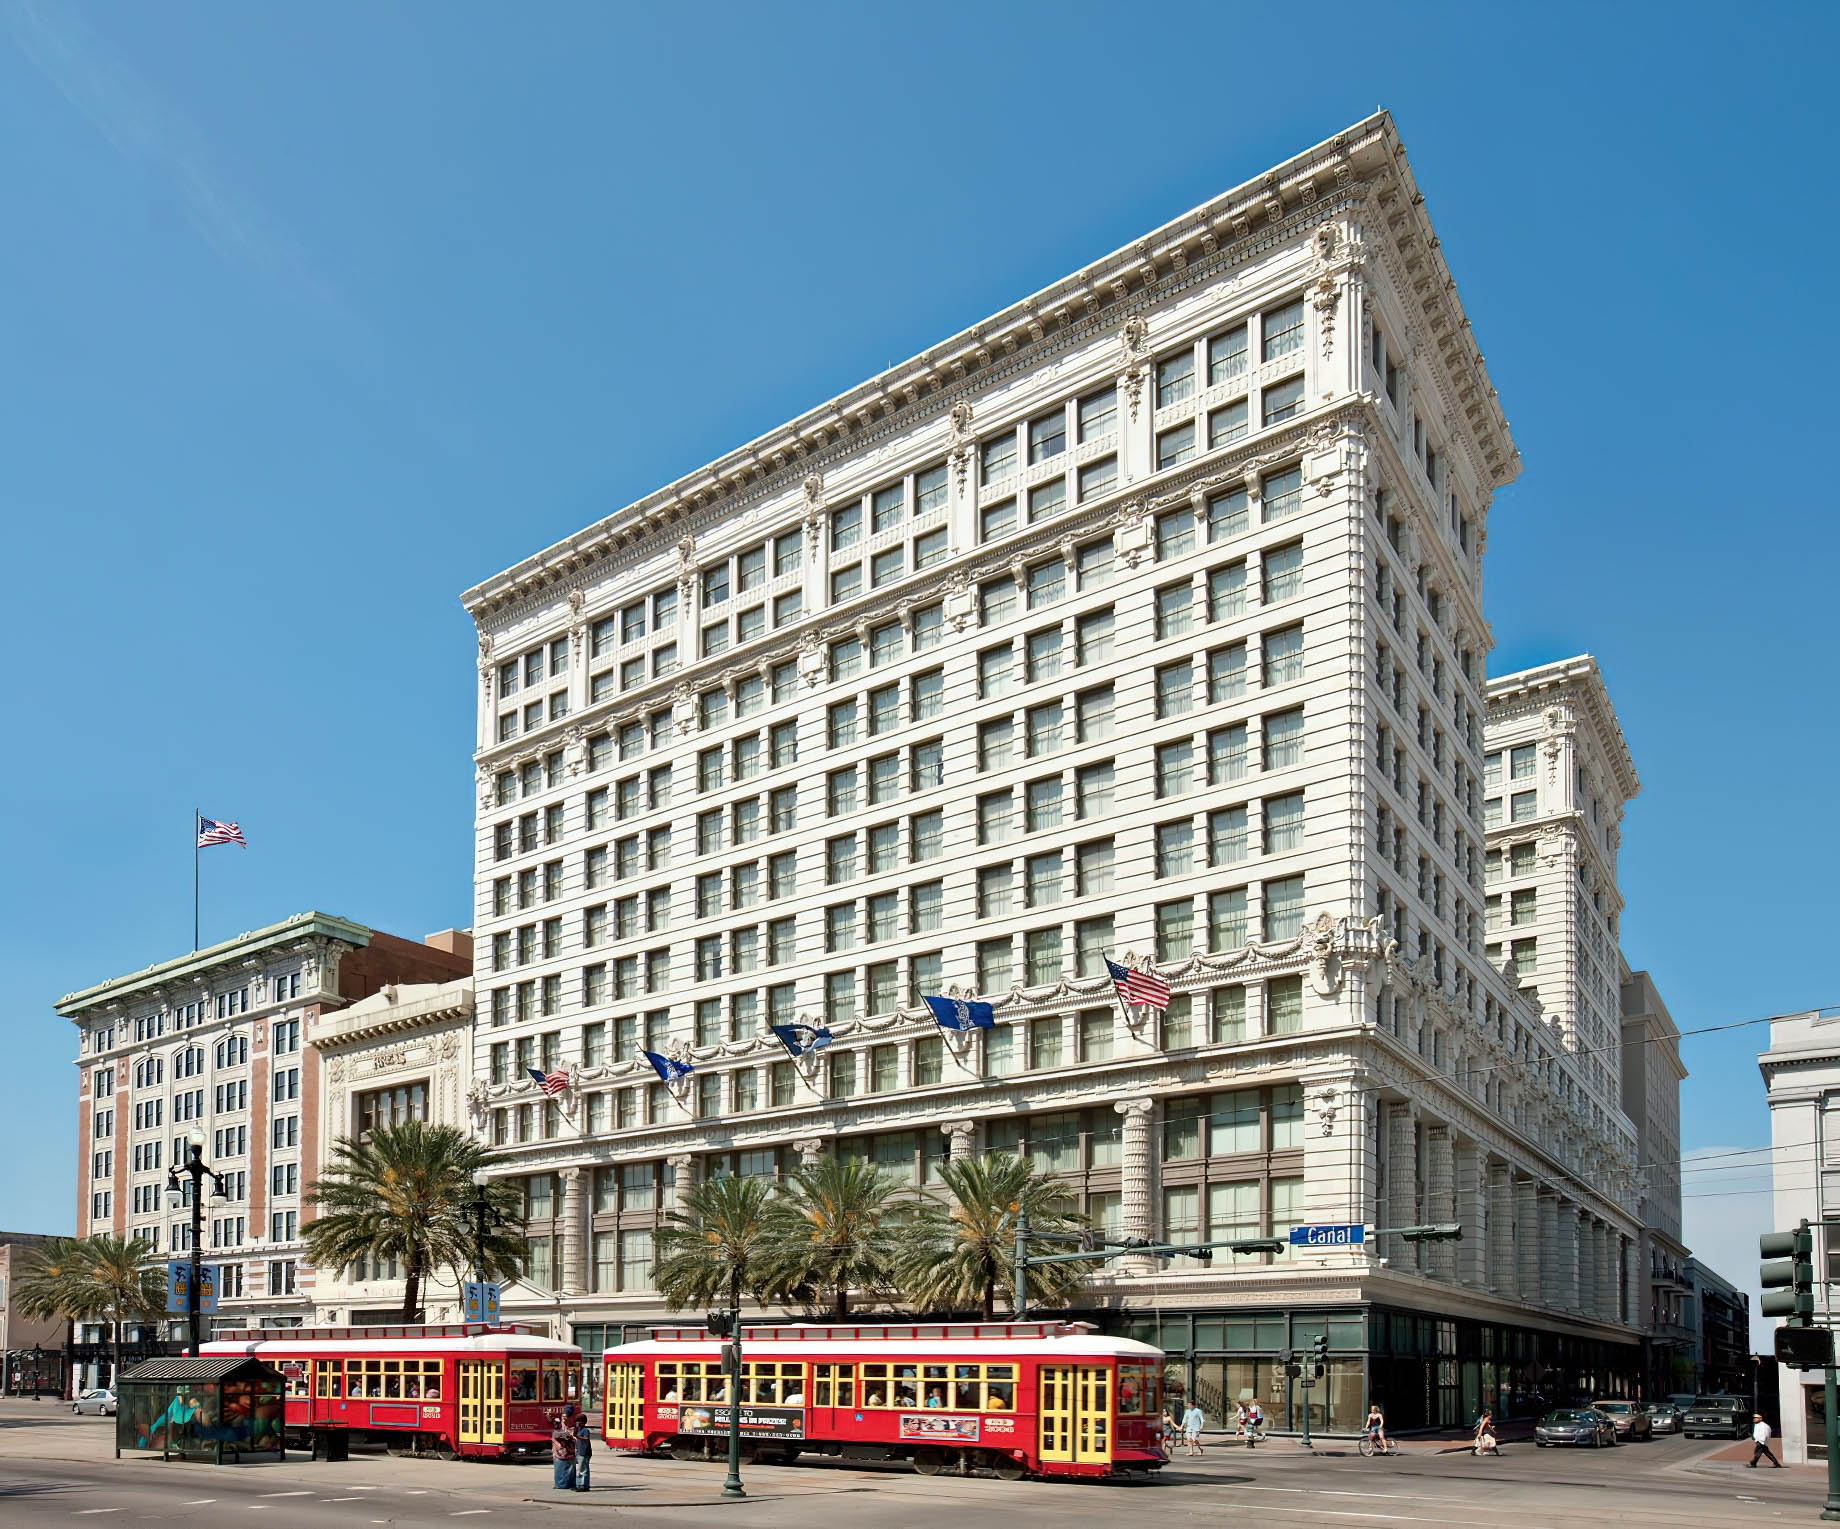 The Ritz-Carlton, New Orleans Hotel - New Orleans, LA, USA - Hotel Exterior Trolly Cars